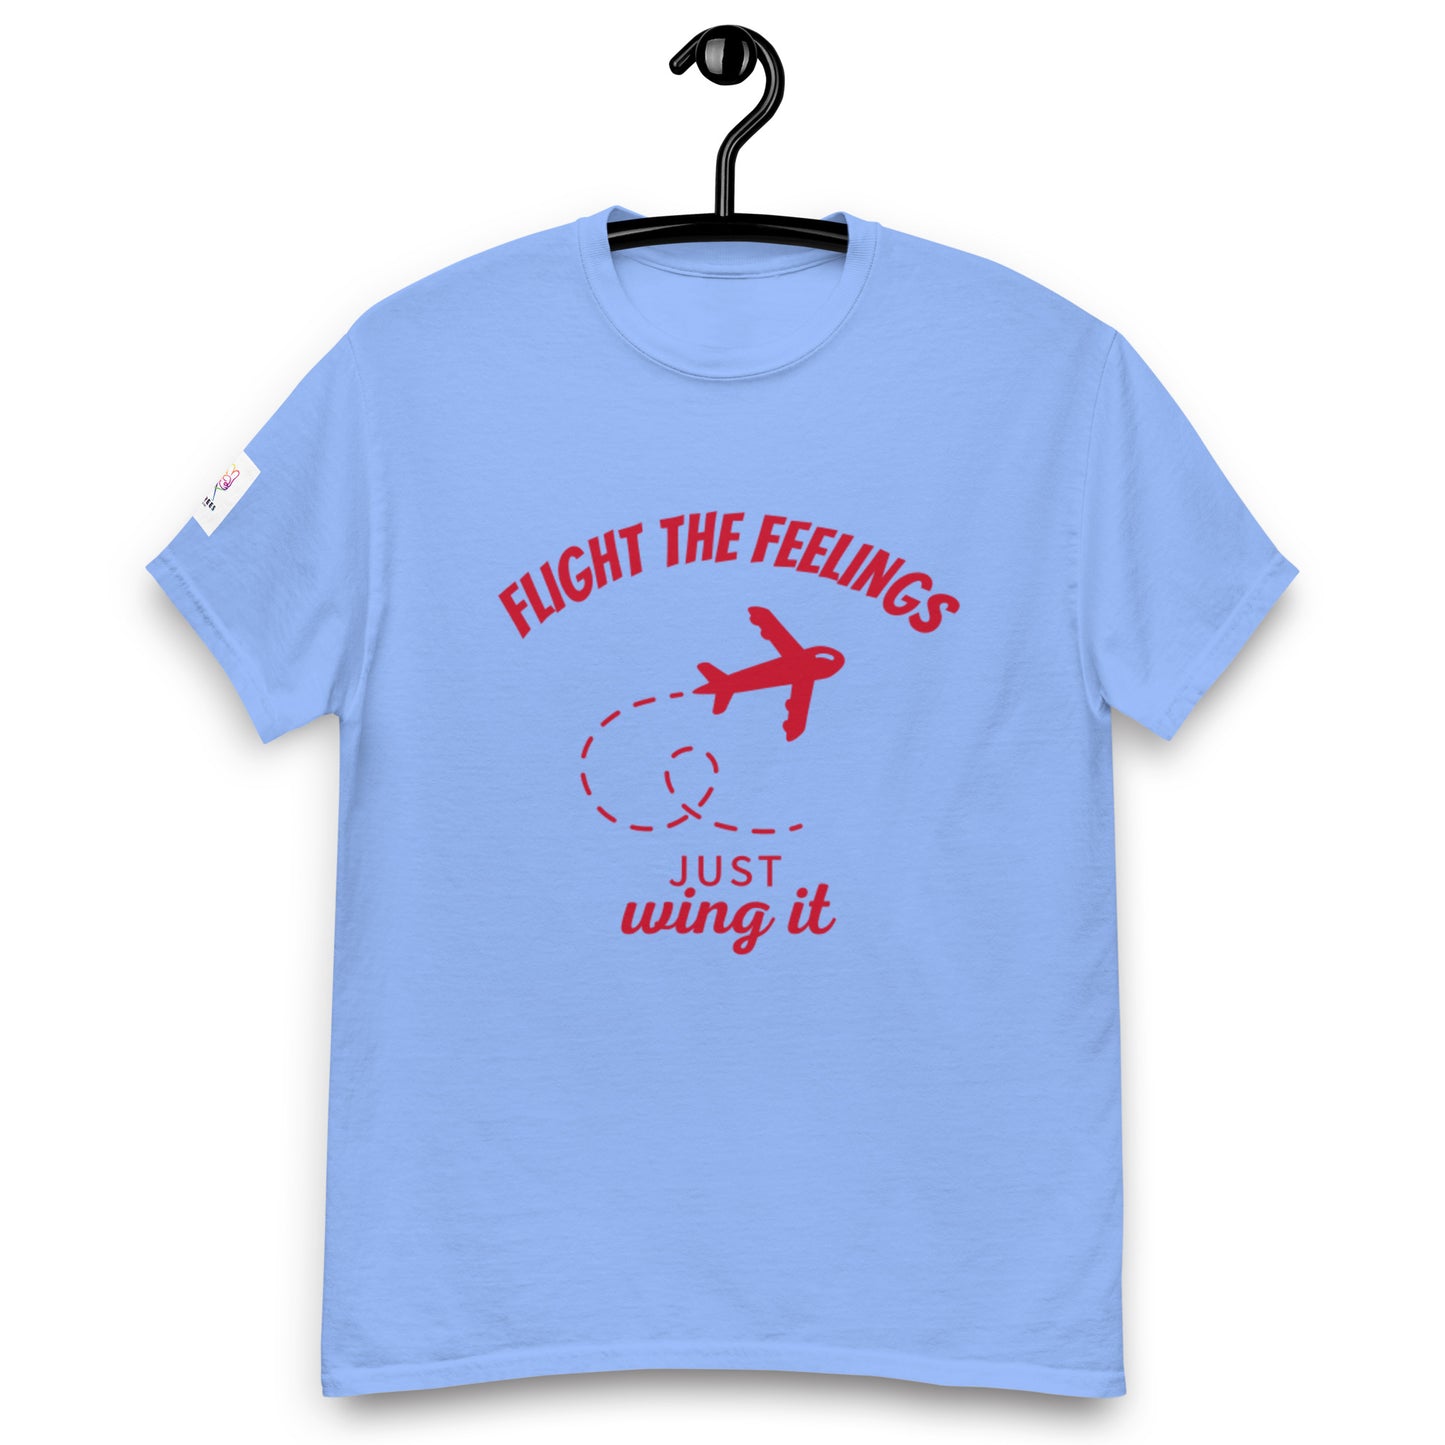 Travel Wear 2 Red classic tee